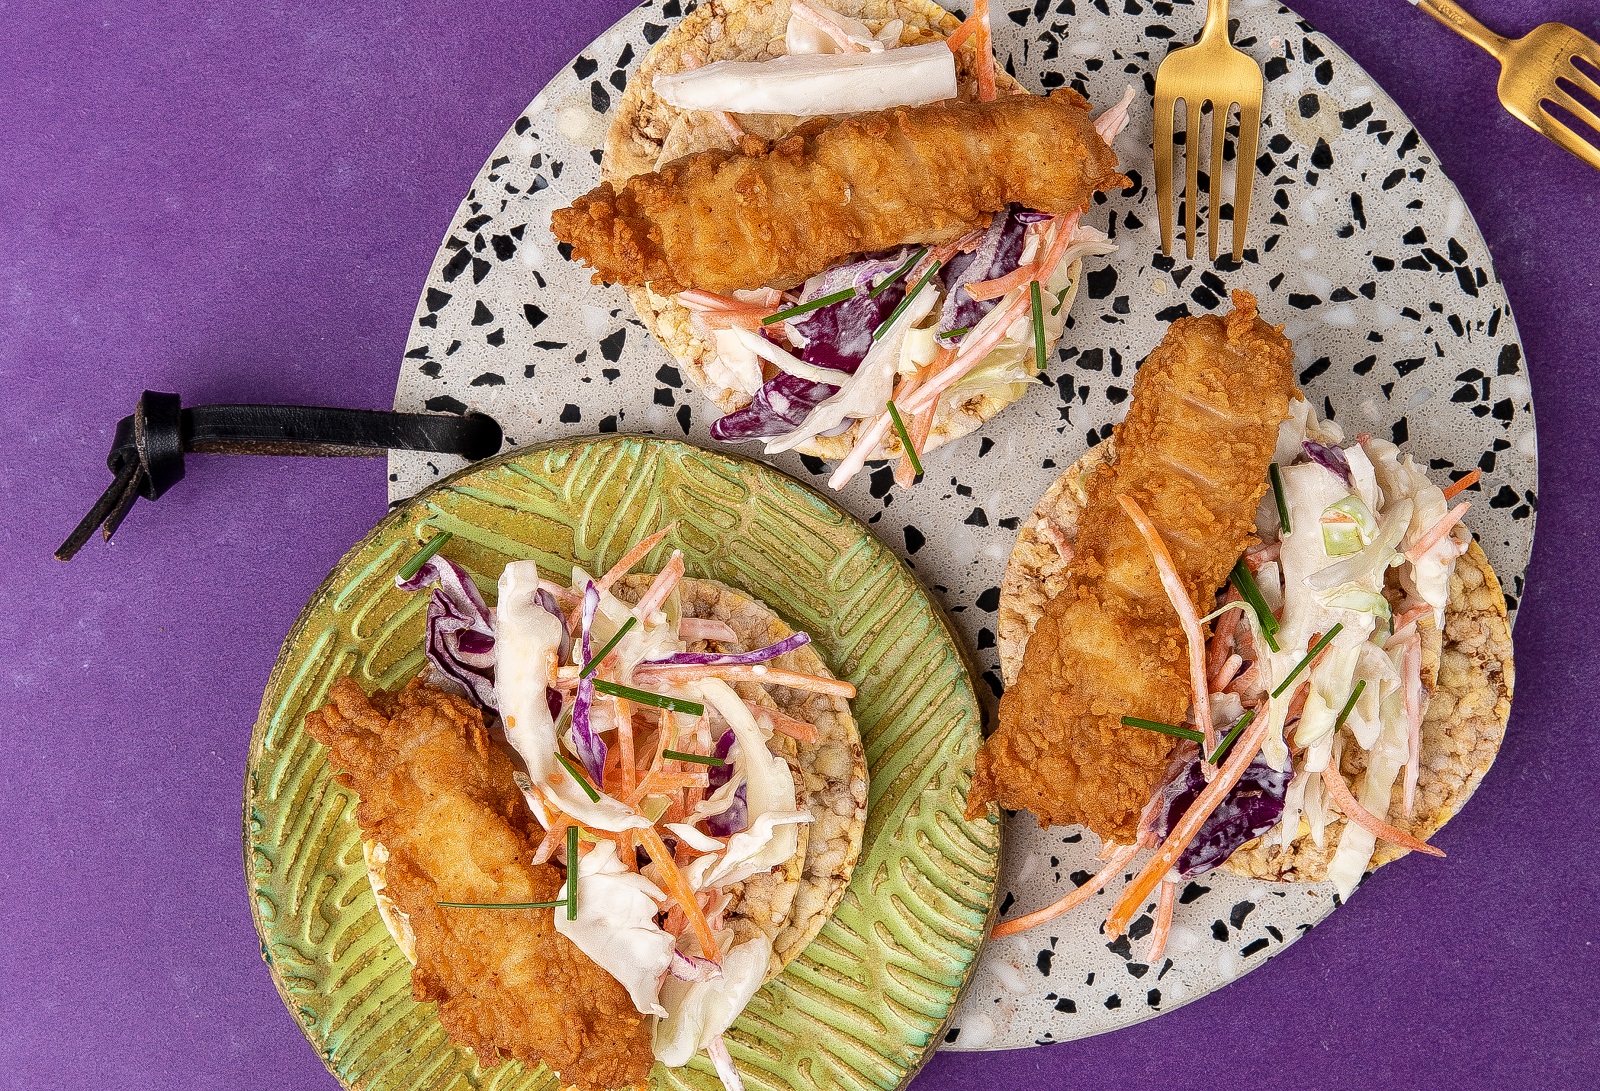 Crispy Chicken & Coleslaw on CORN THINS slices for lunch